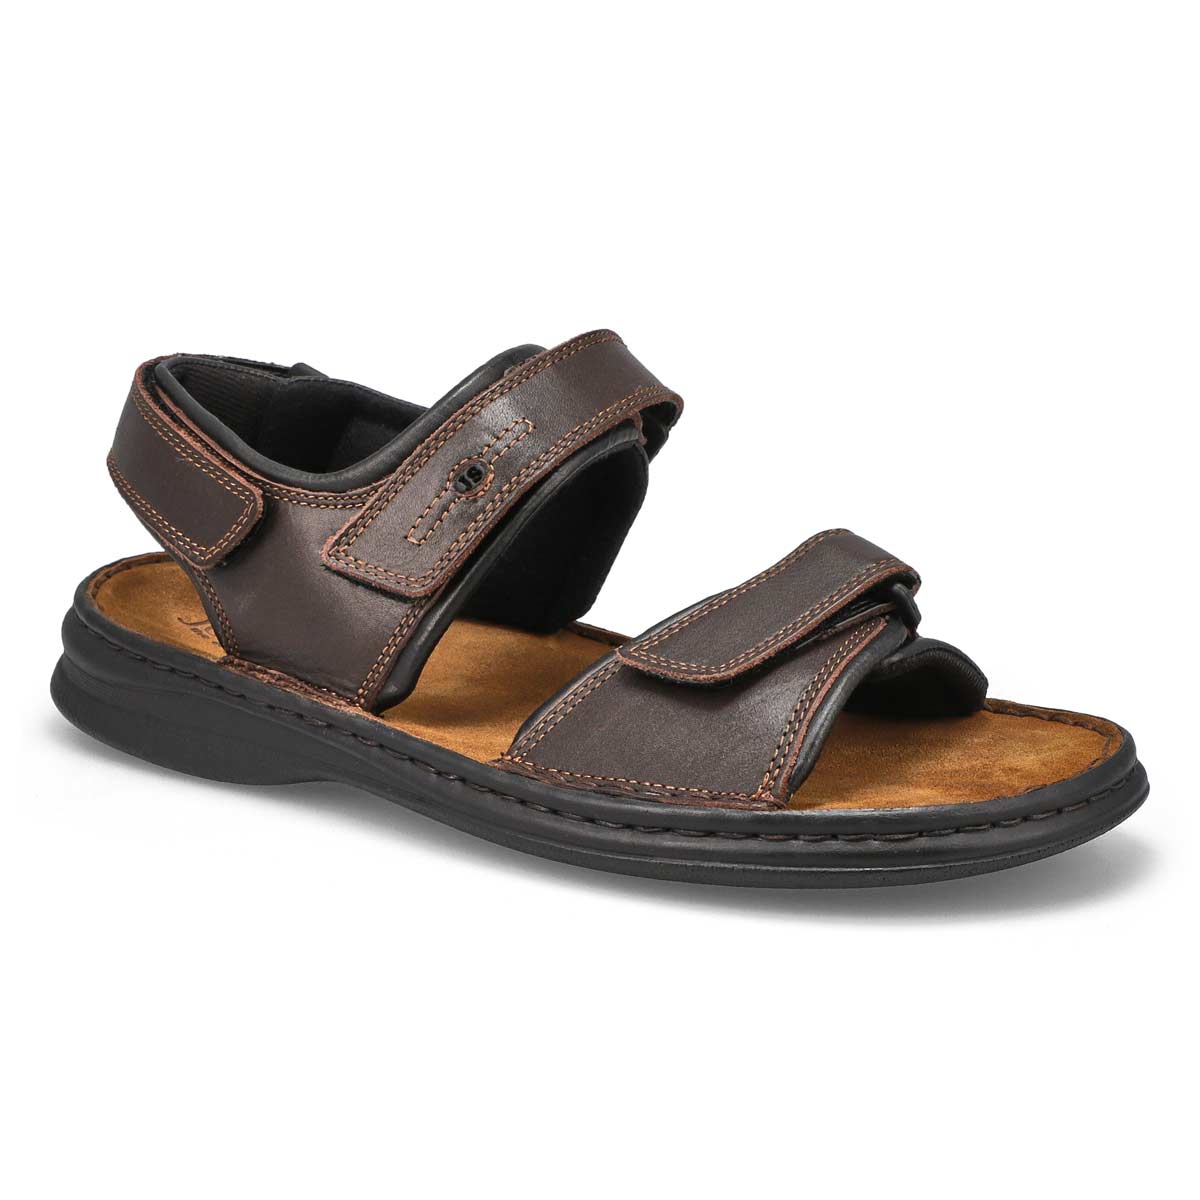 Men's Rafe Leather Casual Sandal Wide - Brown